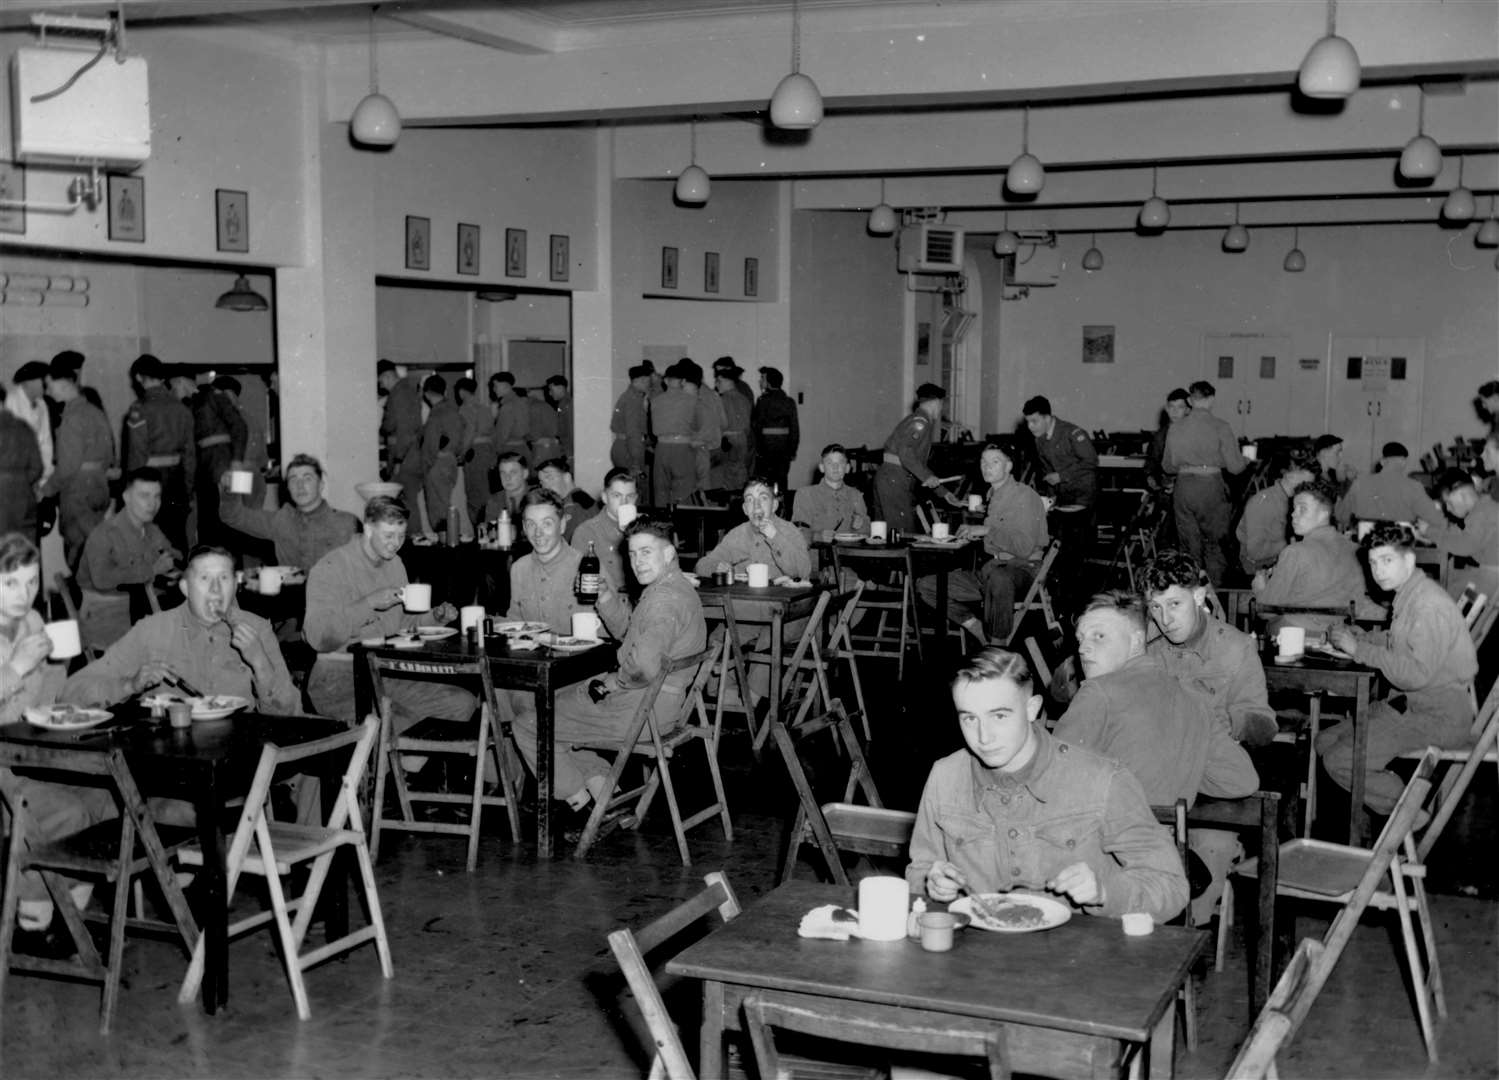 Troops in the new dining hall and kitchen at The Buffs Depot in Canterbury in December 1953. The barracks were later renamed Howe Barracks and in 2016 the land was purchased by Taylor Wimpey, who have since built hundreds of homes on the site, known as Royal Parade